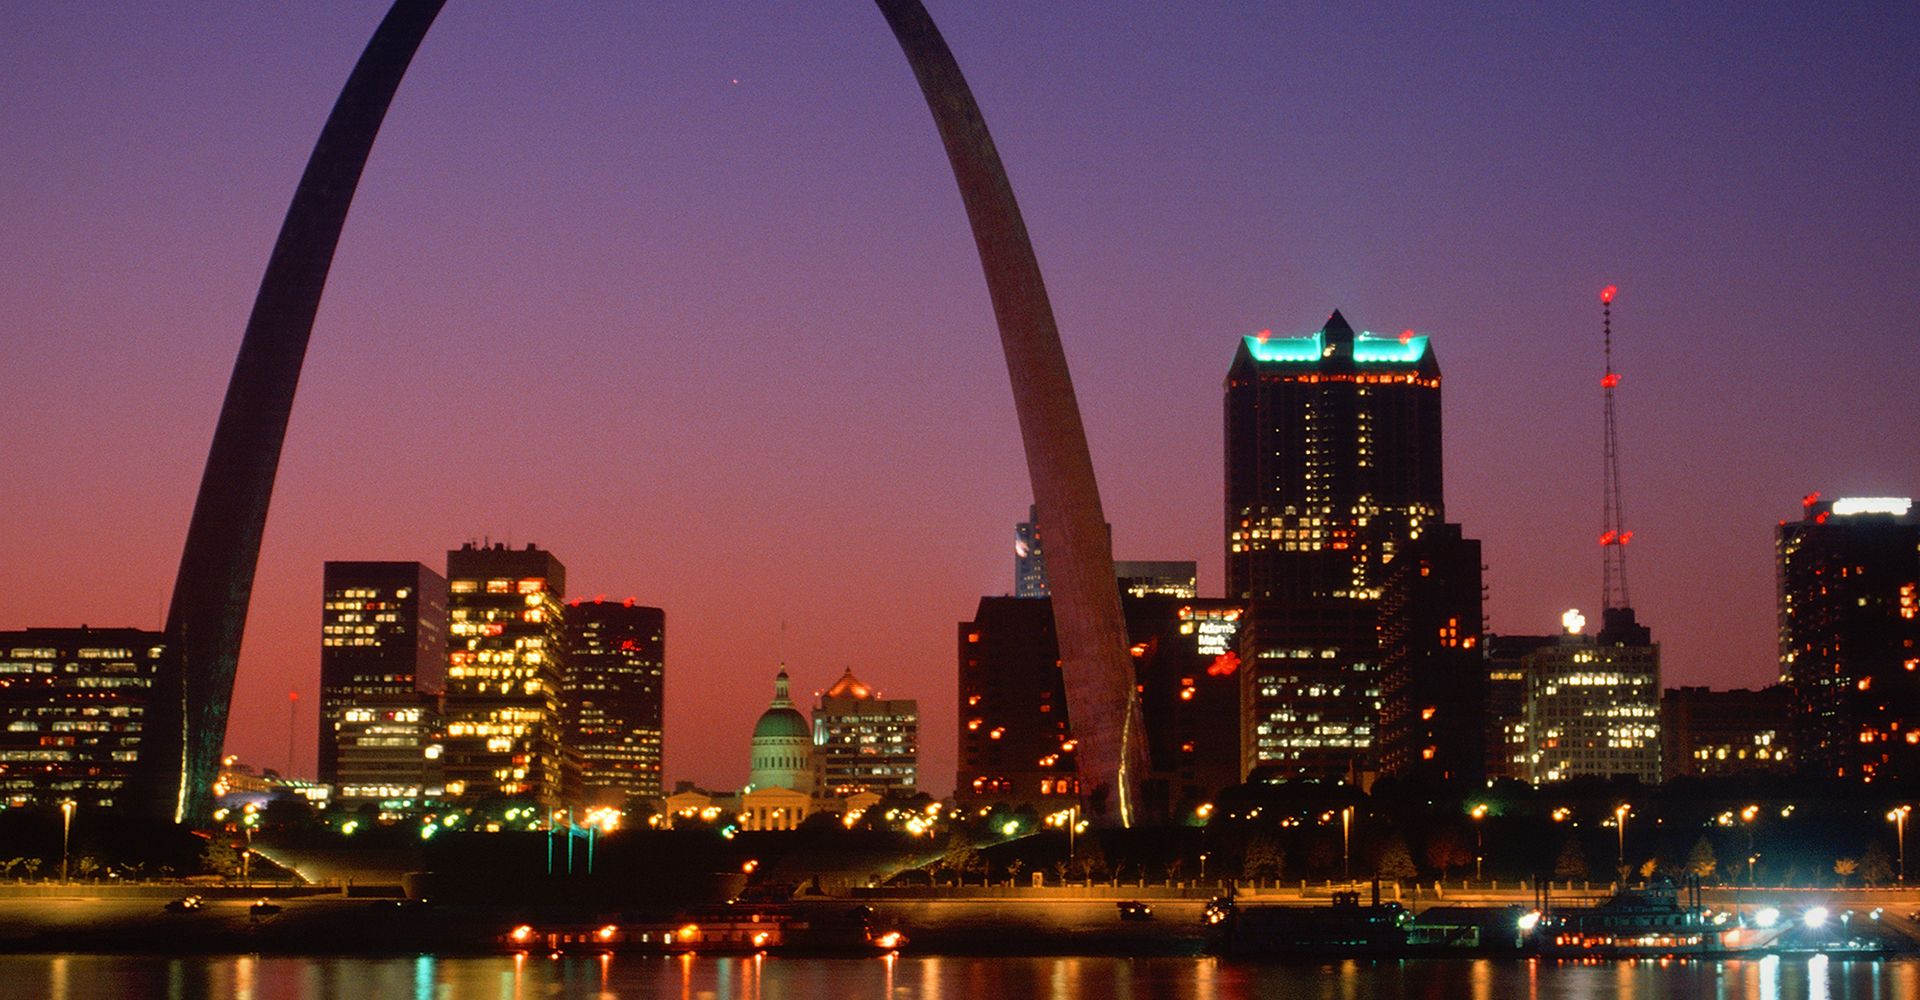 Image of st. Louis 